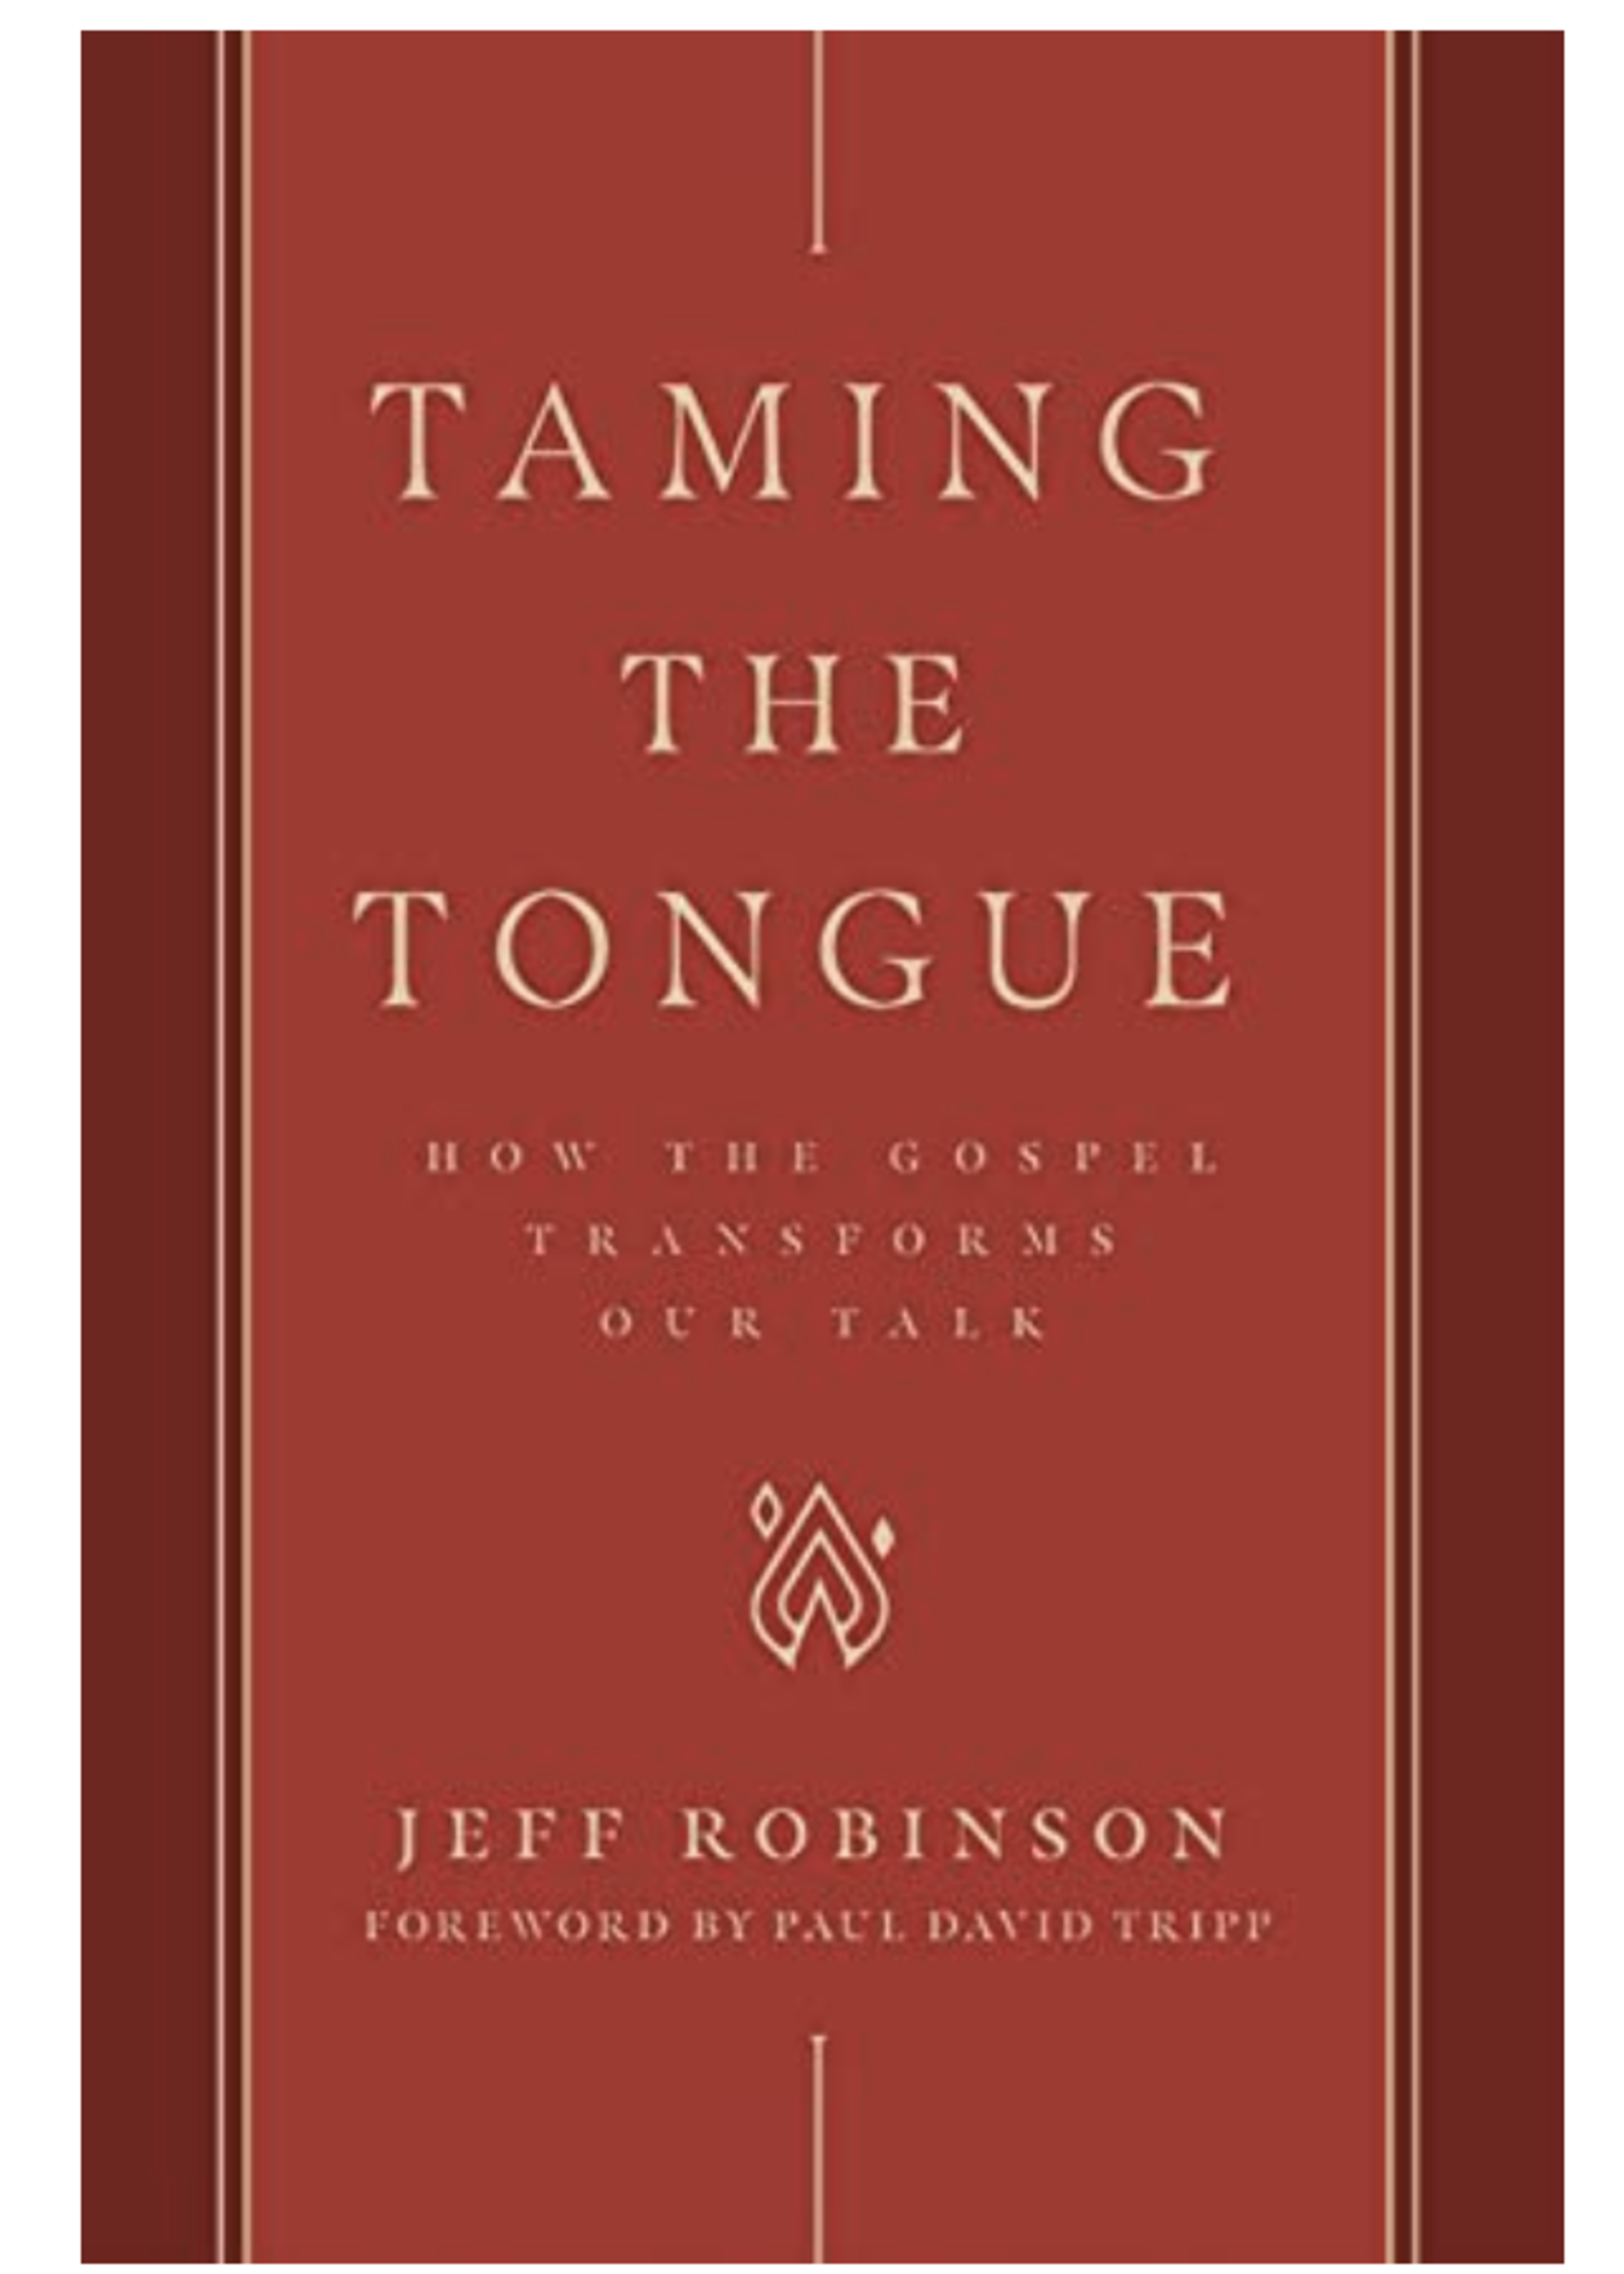 Taming the Tongue: How The Gospel Transforms Our Talk [Jeff Robinson]